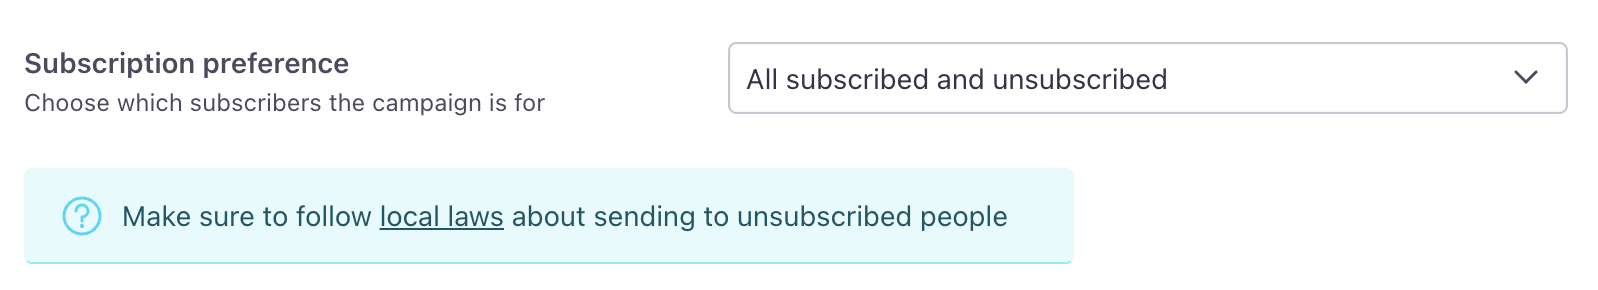 Within Settings for a campaign, the option send to all subscribed and unsubscribed is selected for subscription preferences.